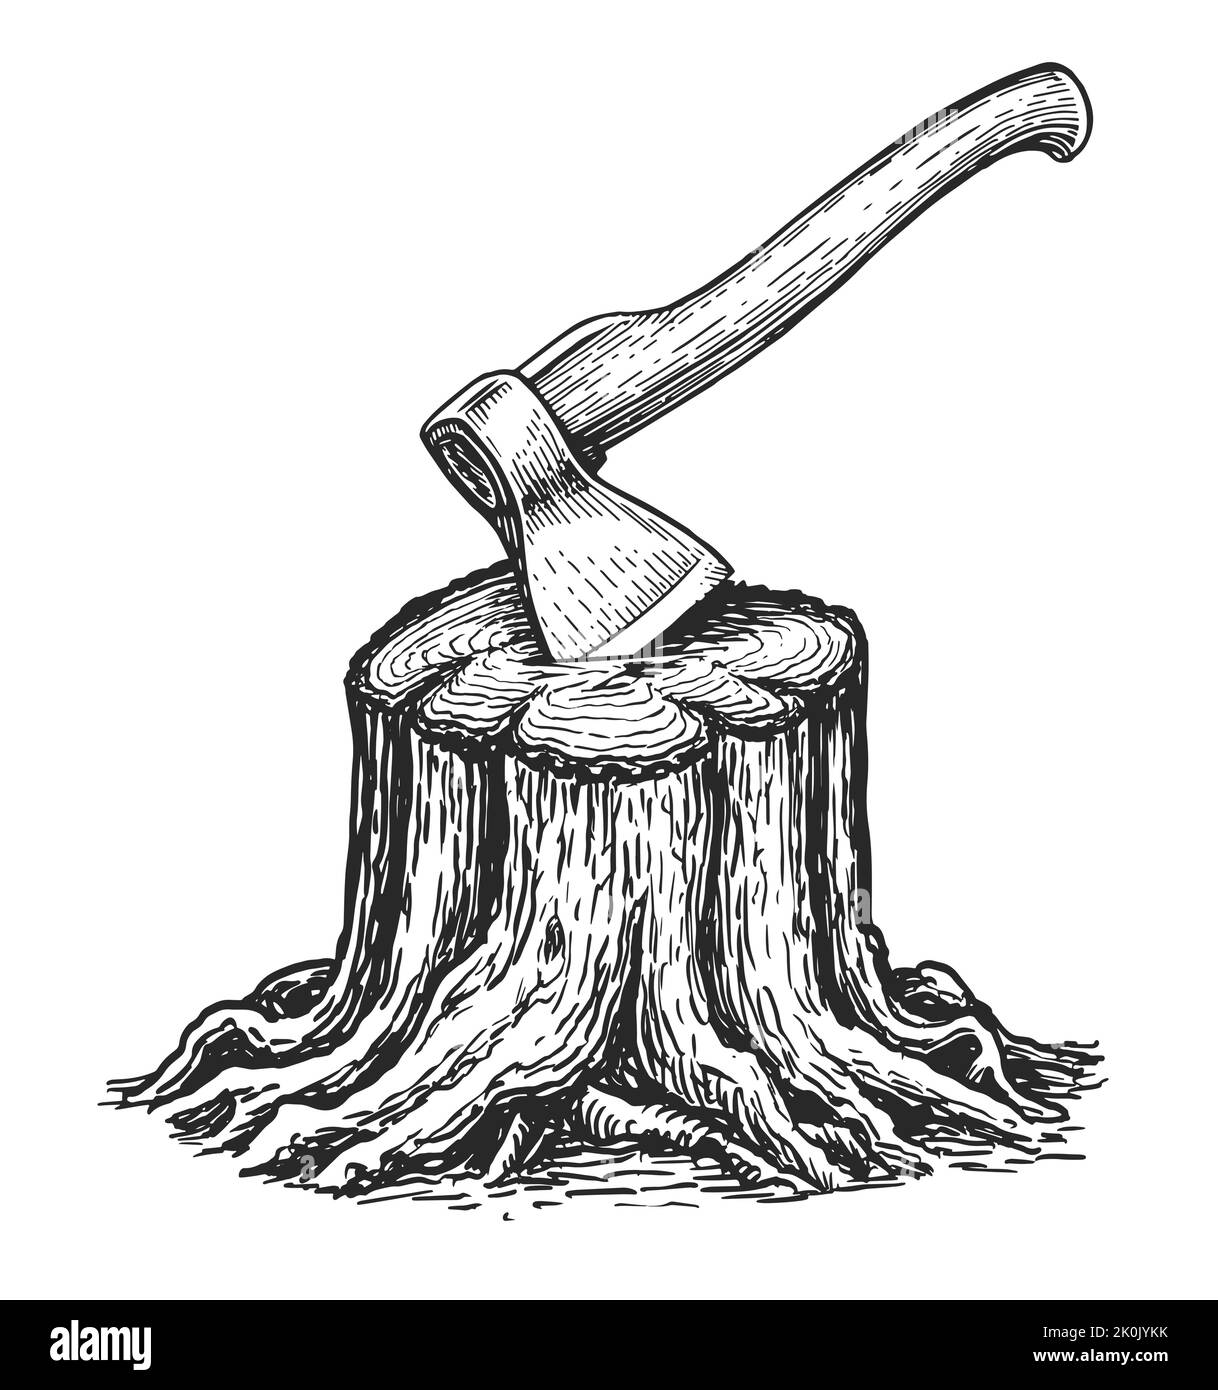 Stump with stuck ax sketch. Cutting wood and logging. woodcutter tool for chopping wood. Carpentry, natural lumber Stock Vector